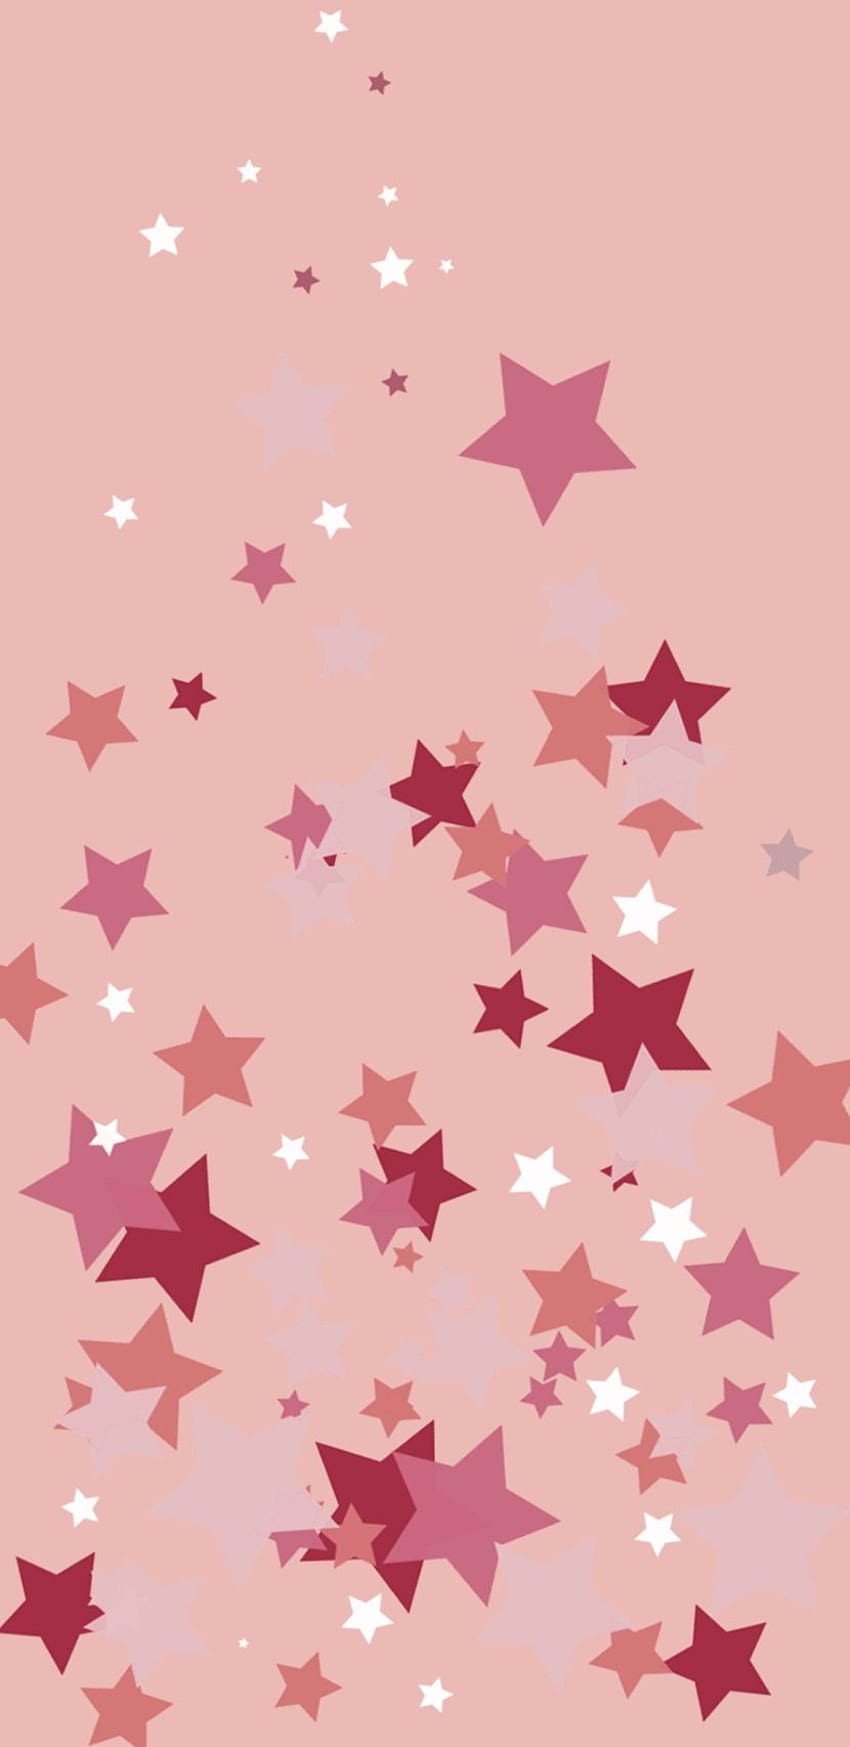 HD wallpaper blue and pink stars illustration backgrounds glitter paint   Wallpaper Flare